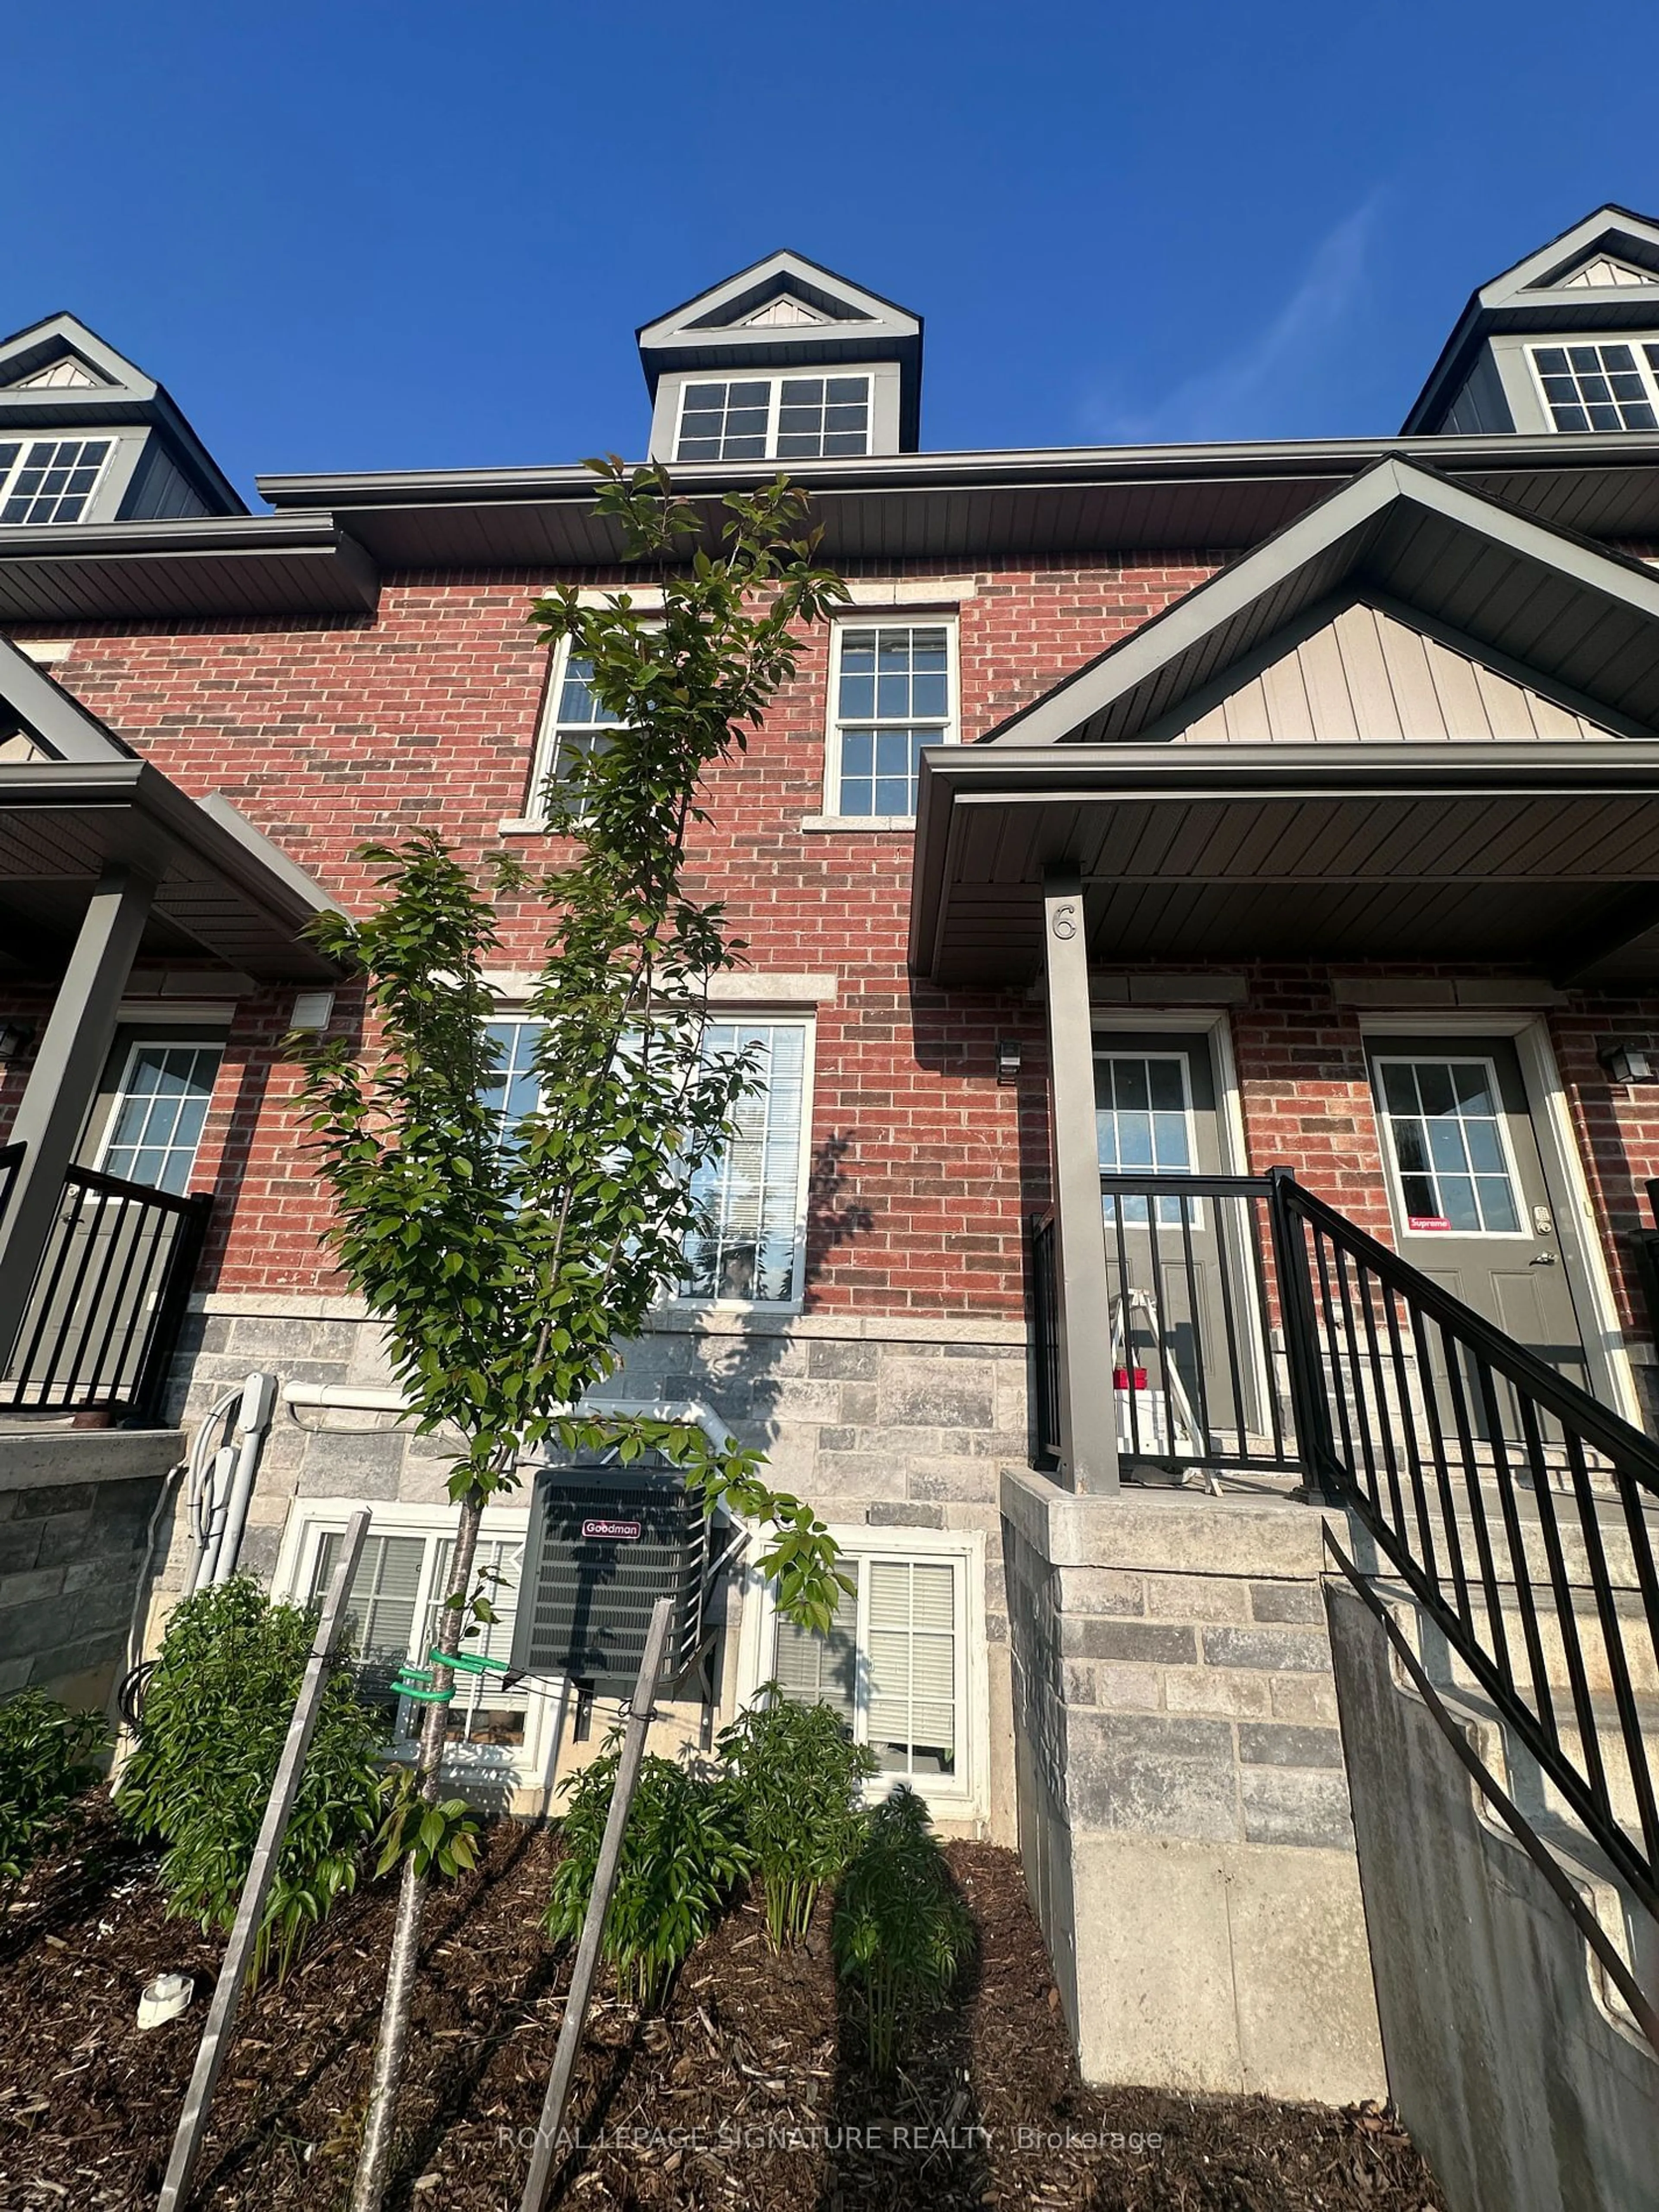 Home with brick exterior material for 252 Penetanguishene Rd #6, Barrie Ontario L4M 7C2